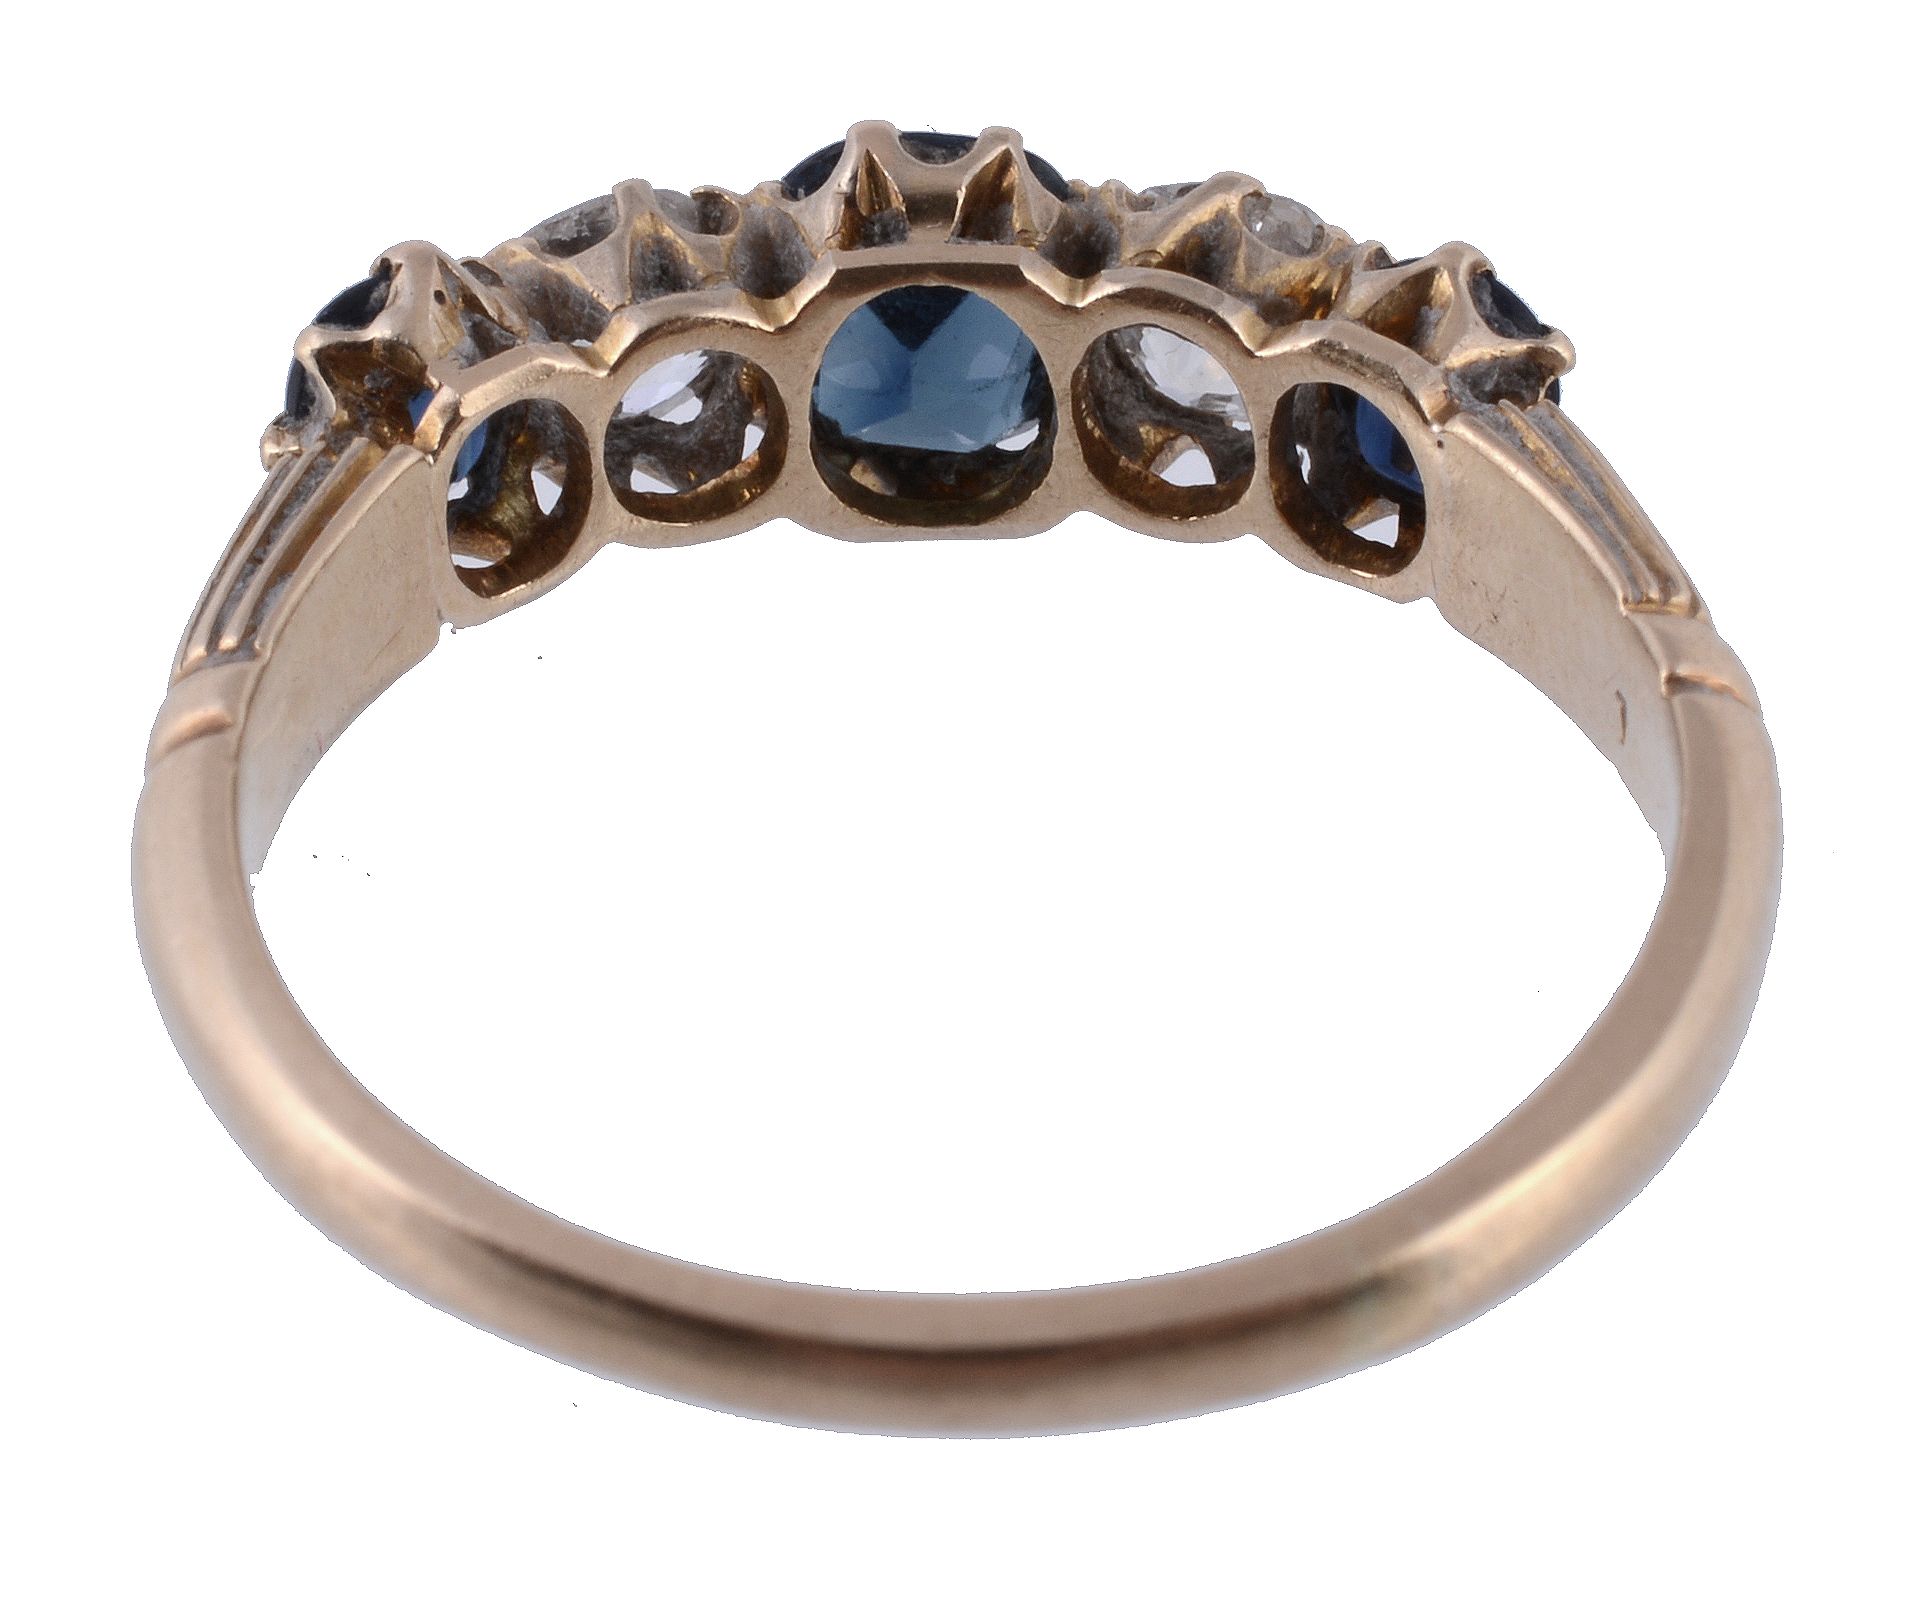 A late Victorian sapphire and diamond ring, circa 1900, the central oval shaped sapphire claw set - Image 2 of 2